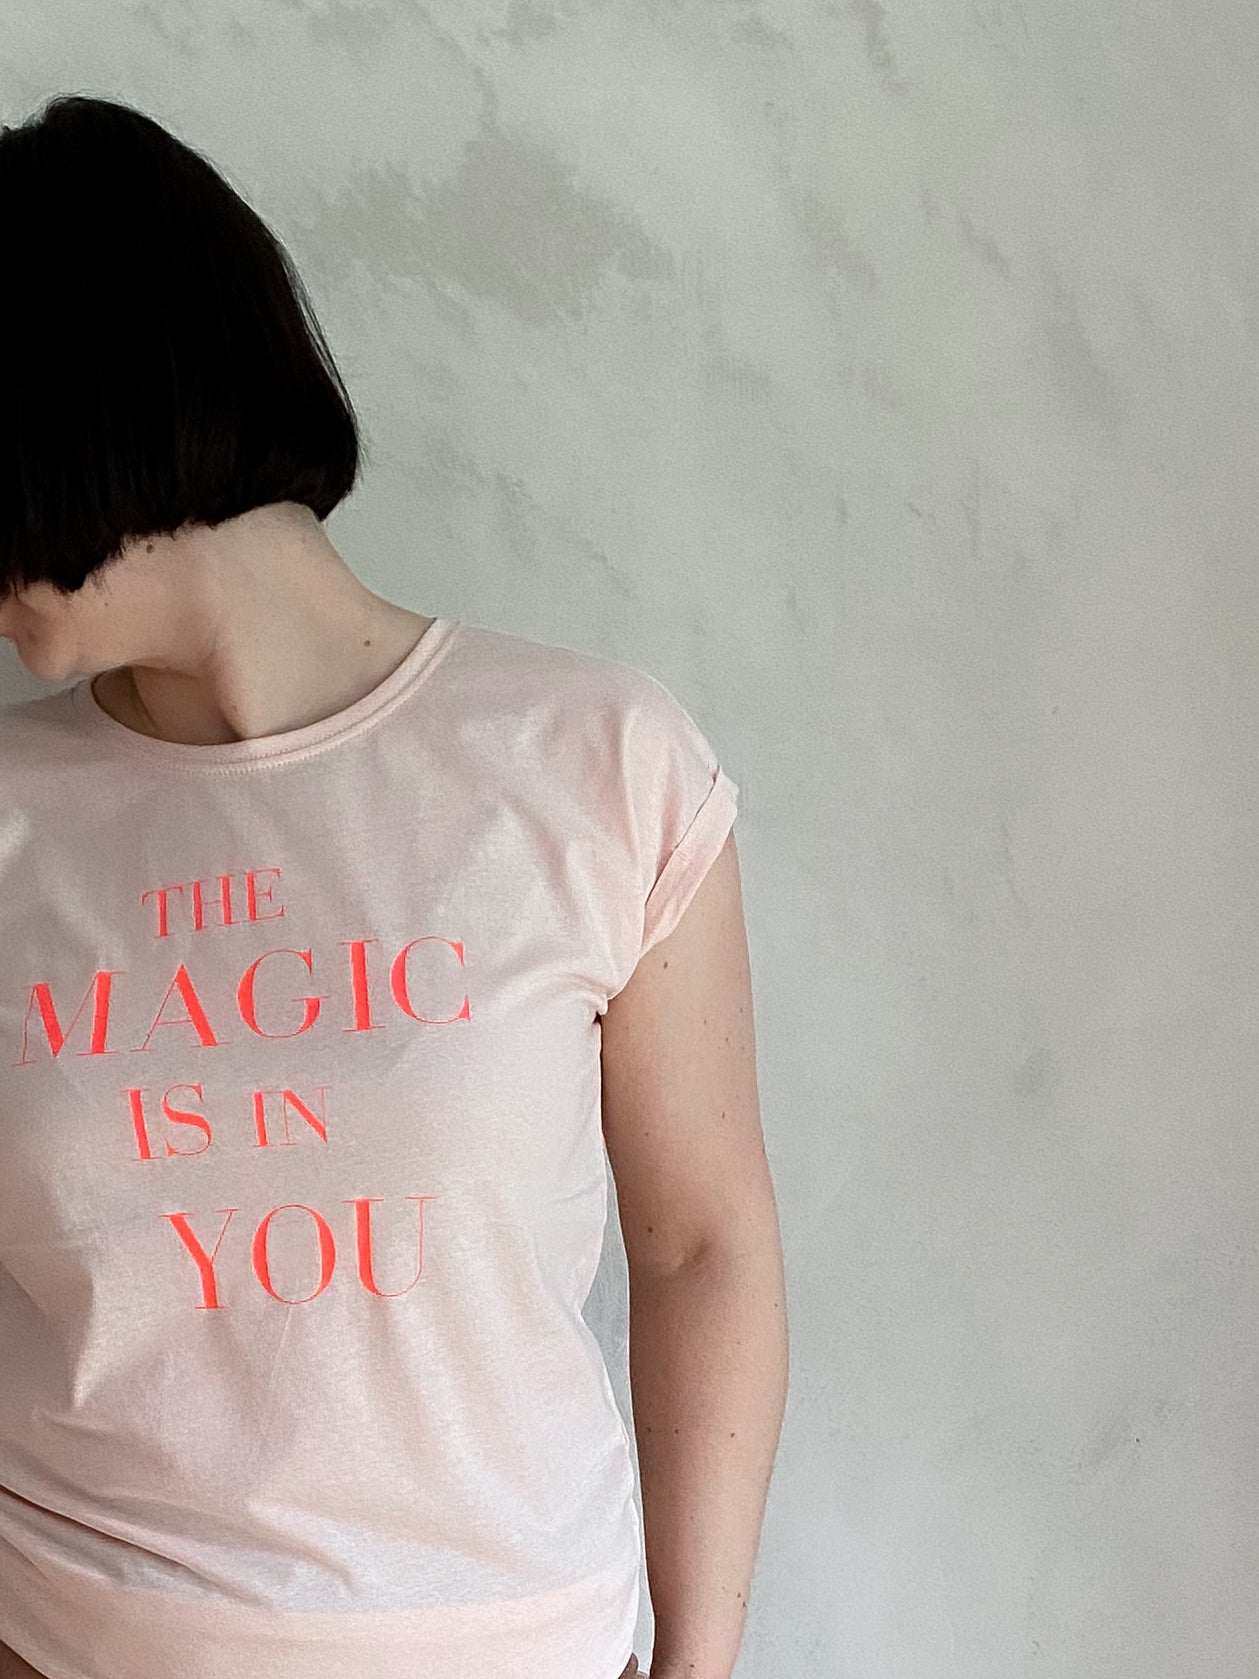 Shirt "THE MAGIC IS IN YOU"